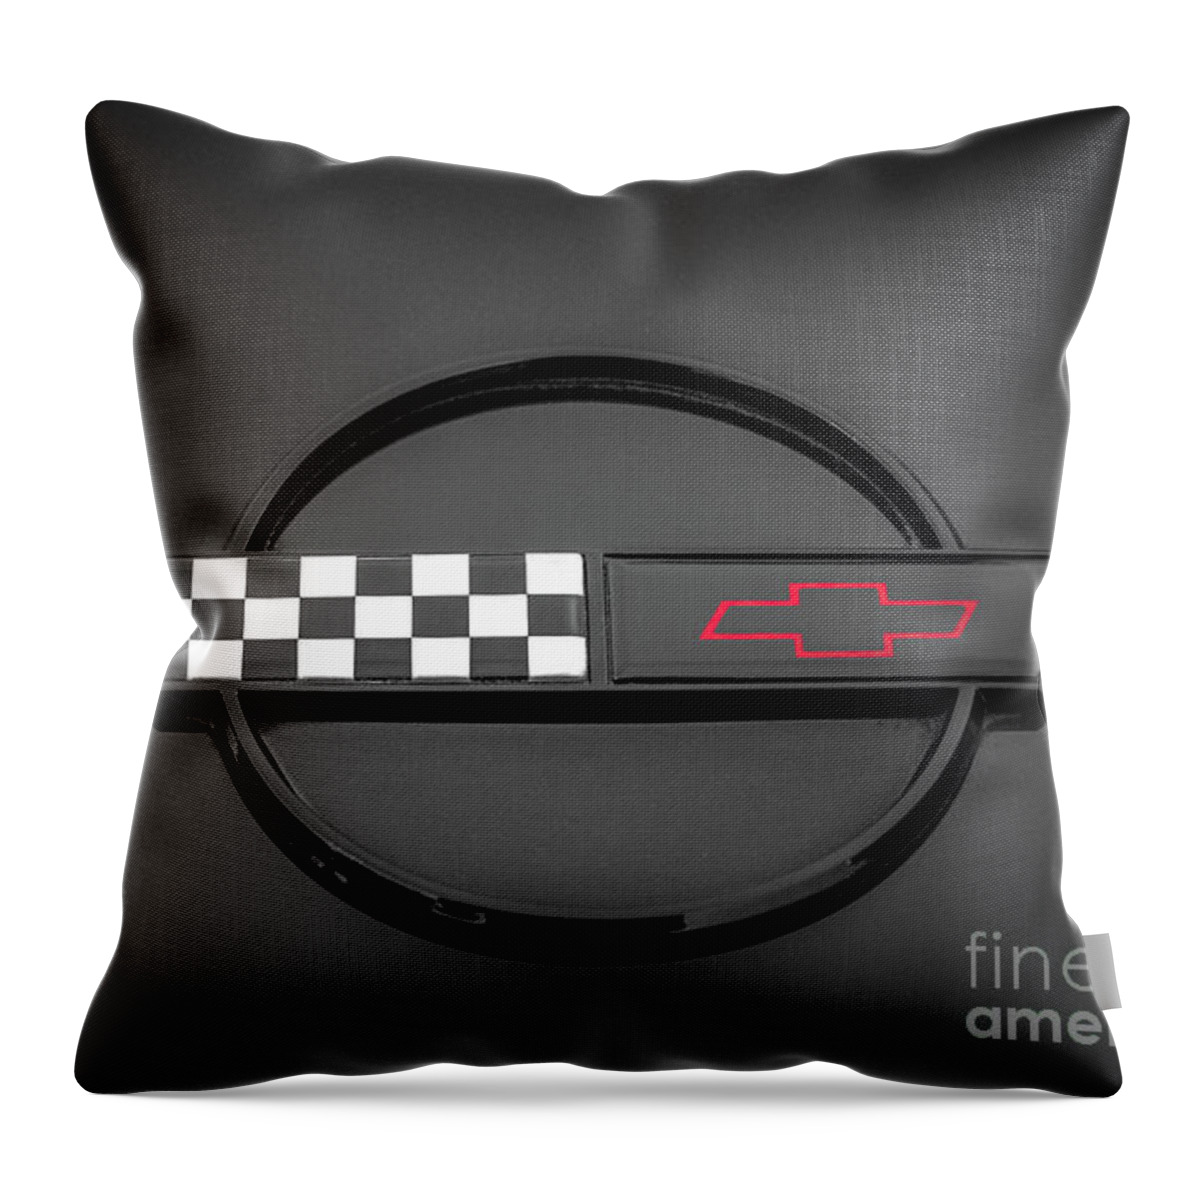 Car Throw Pillow featuring the photograph Corvette C4 Hood Ornament by Colleen Kammerer